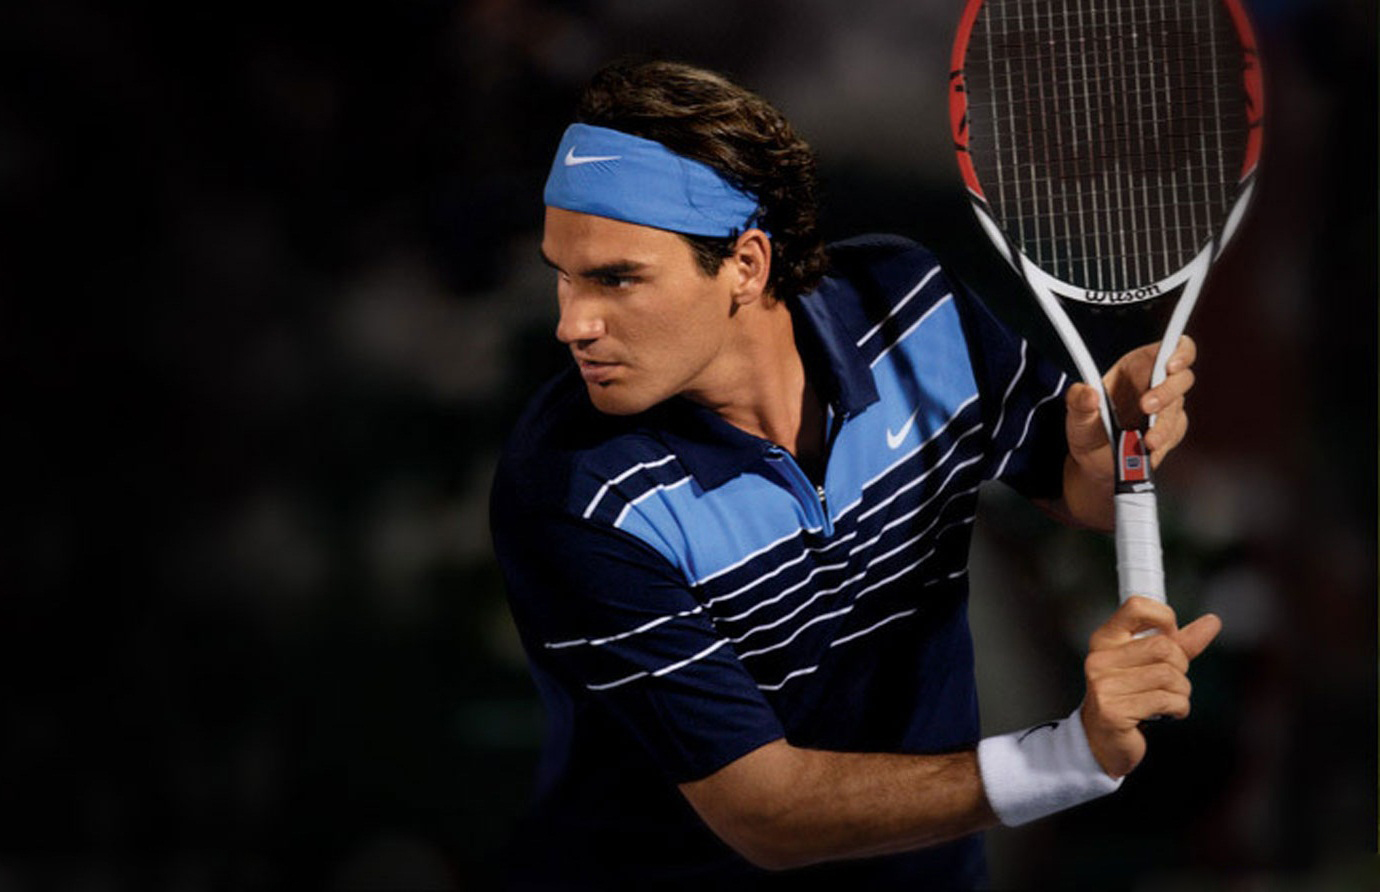 Roger Federer Latest HD Wallpaper 2013 | It's All About Sports Player Hd Wallpapers1380 x 892